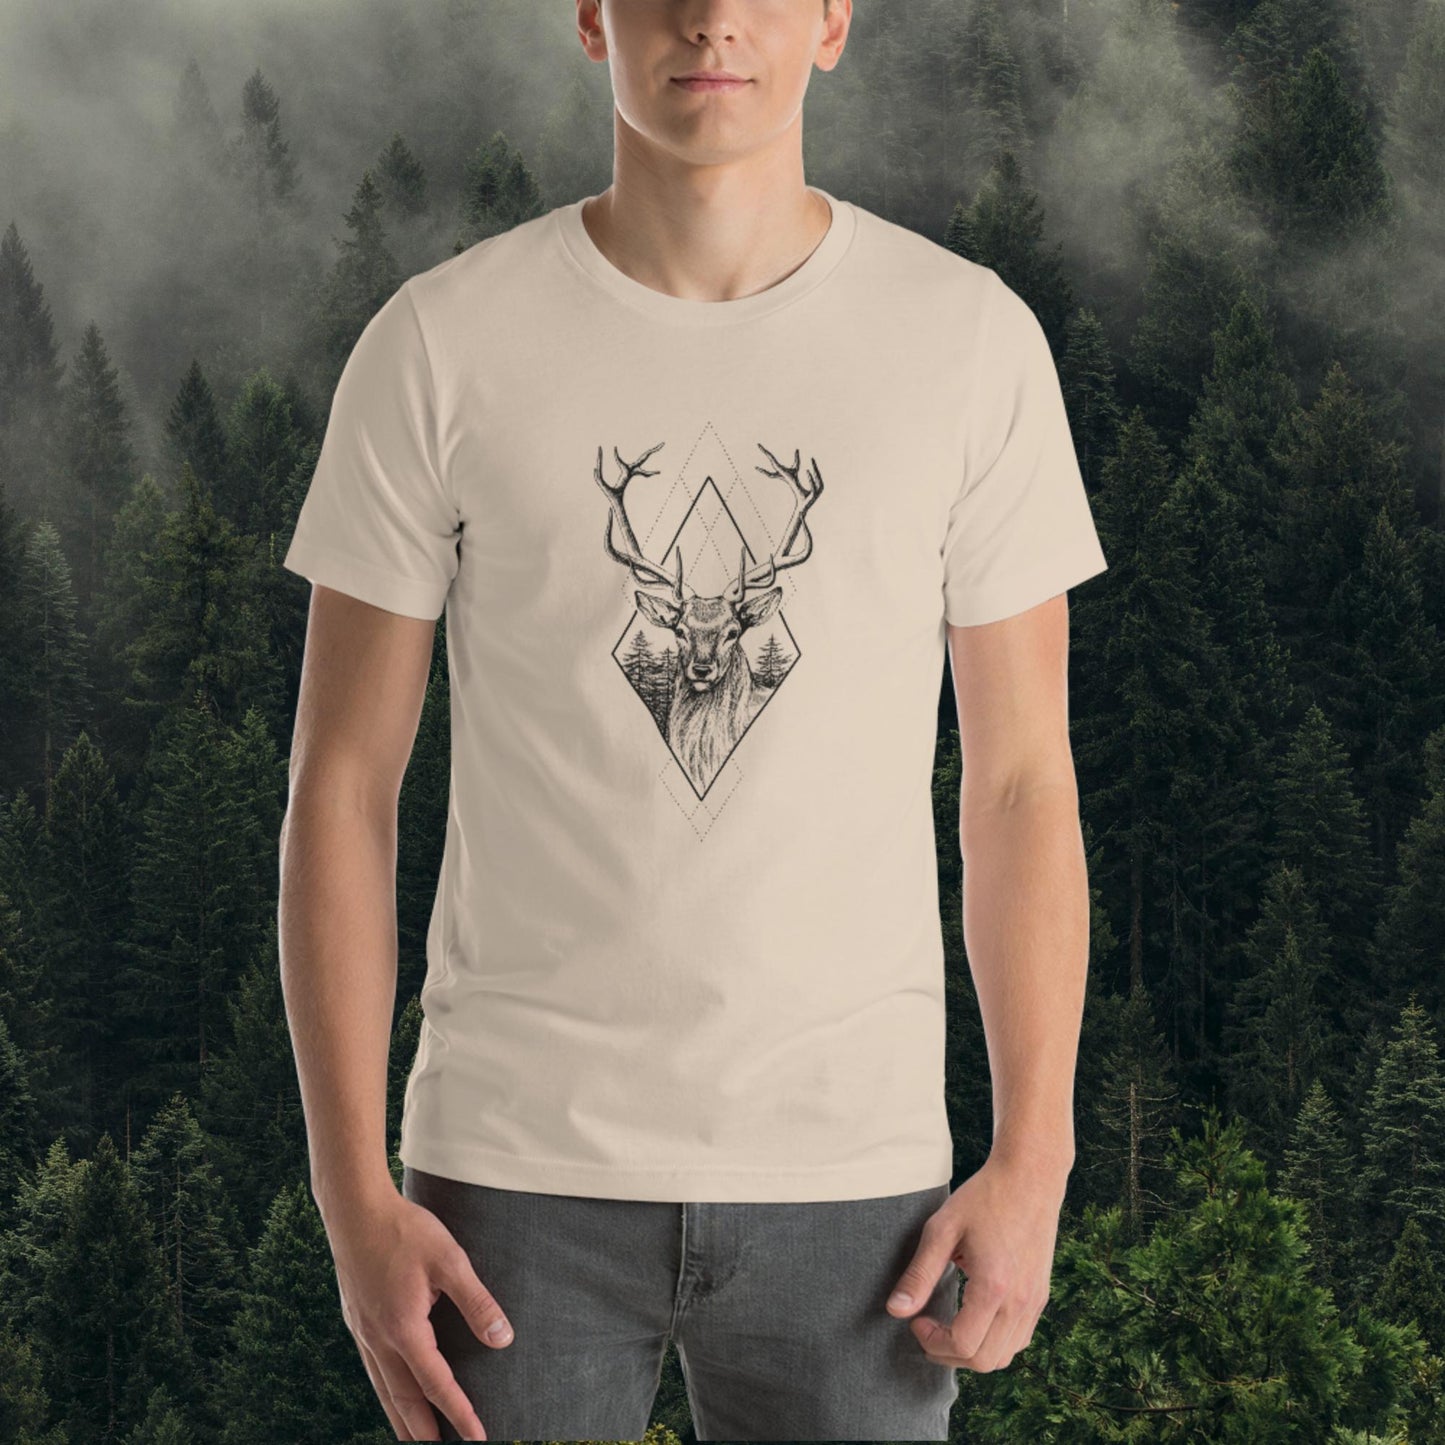 Deer Forest - Unisex Tees, Graphic T Shirts for Women, Mens Shirts, Cotton Graphic Shirt